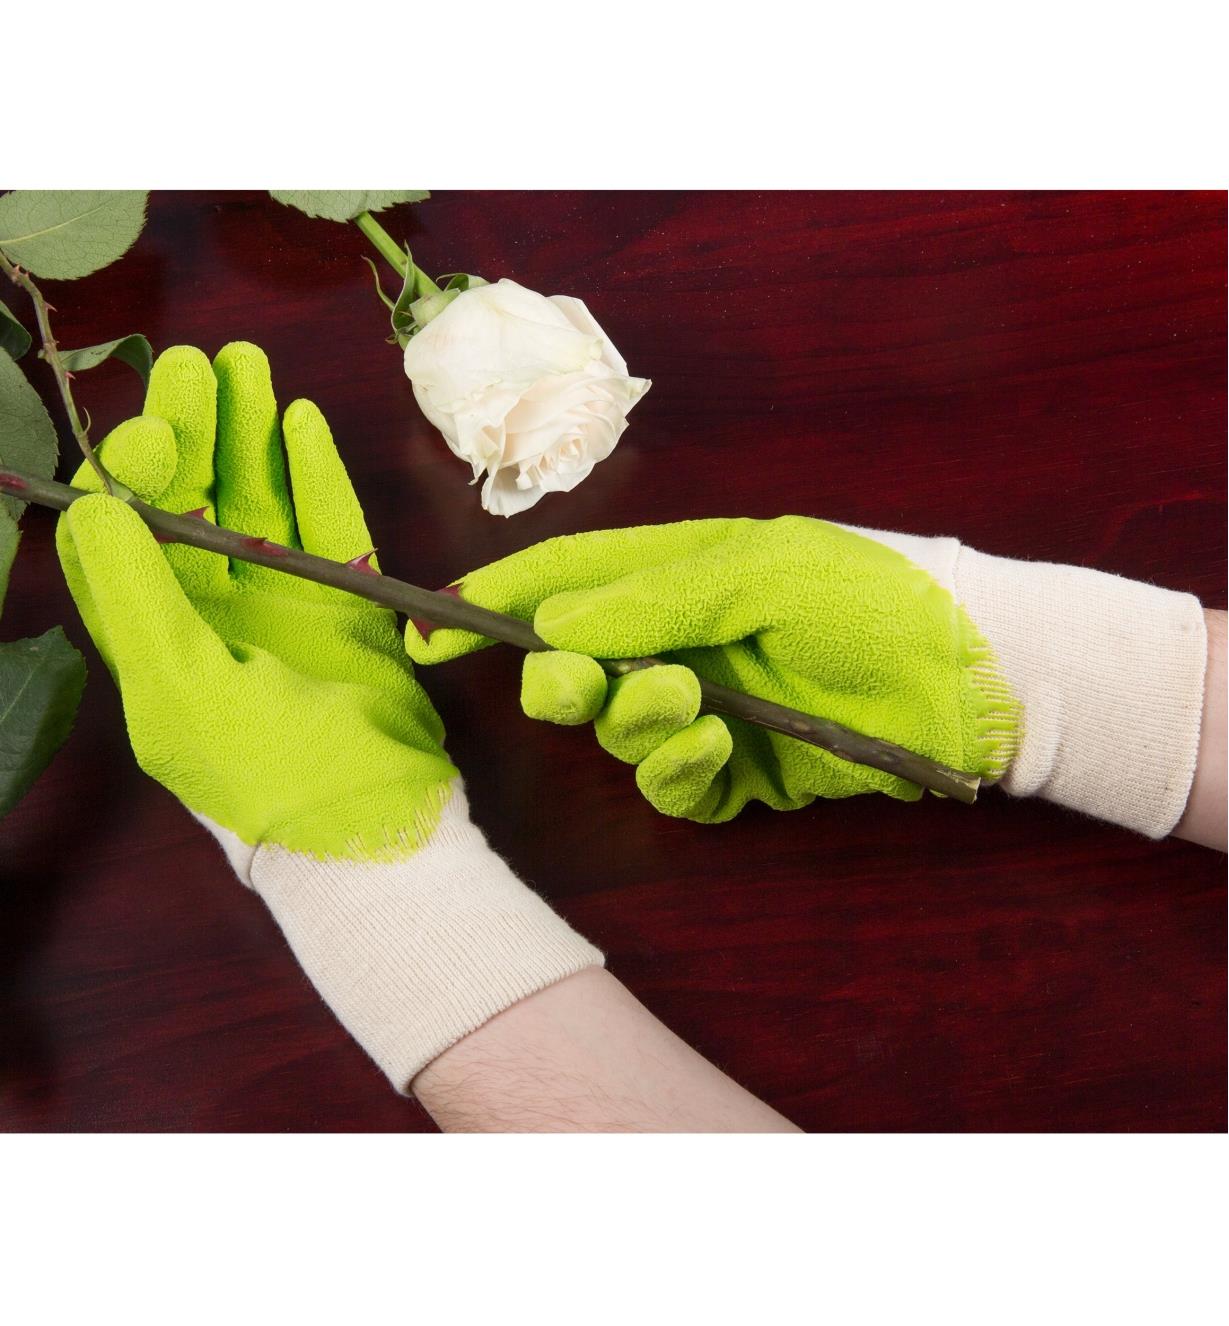 Wearing the Original Gripper Mud Gloves and holding a rose branch